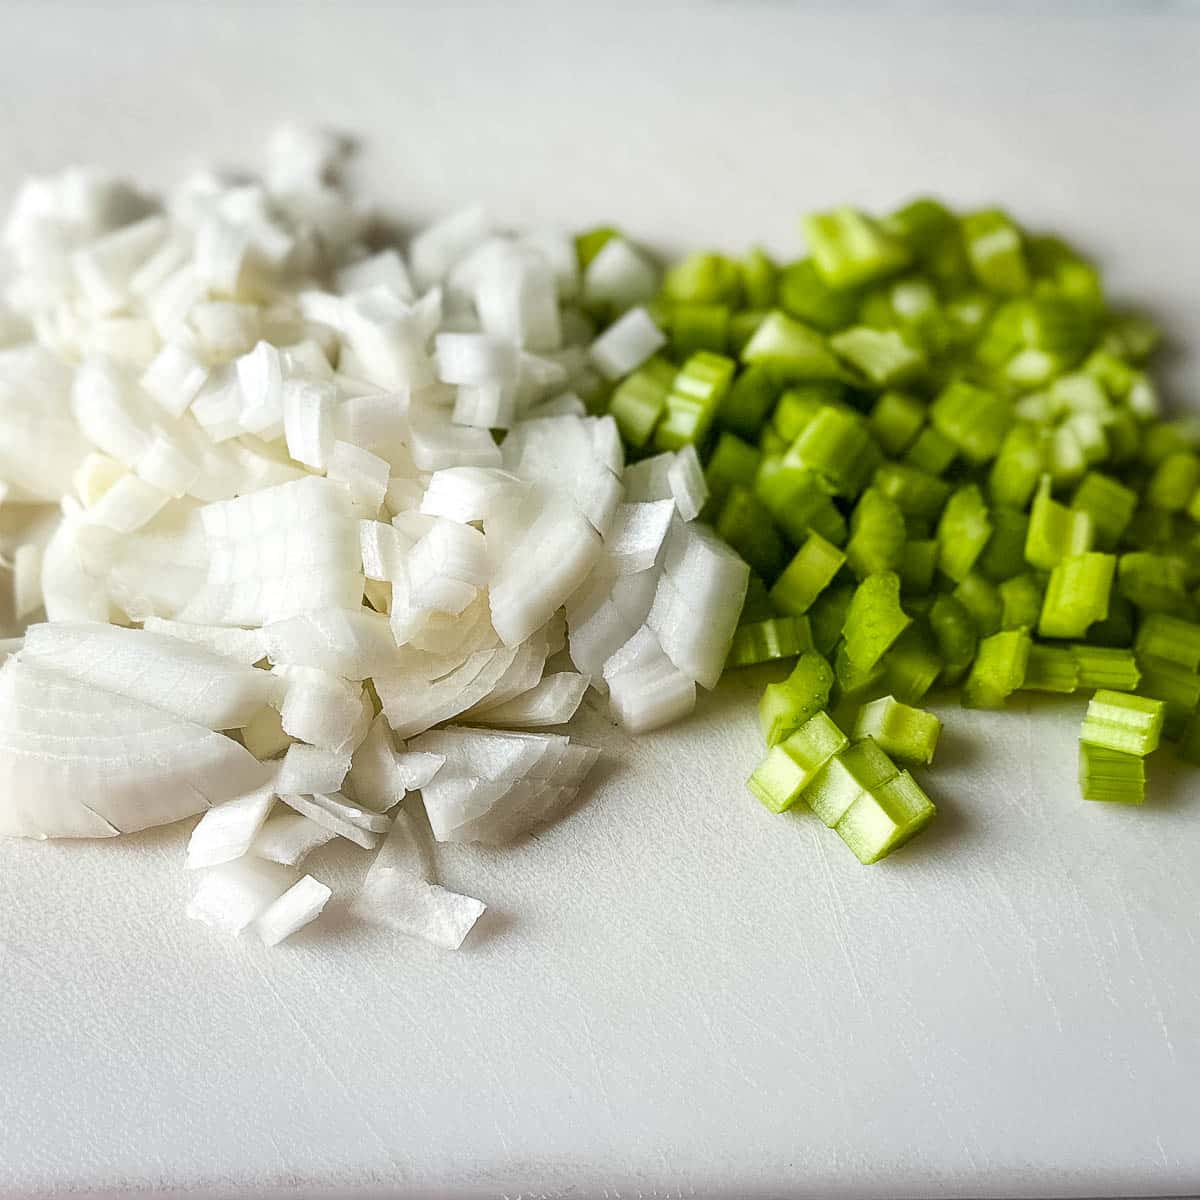 Finely diced onion and celery on a white cutting board.